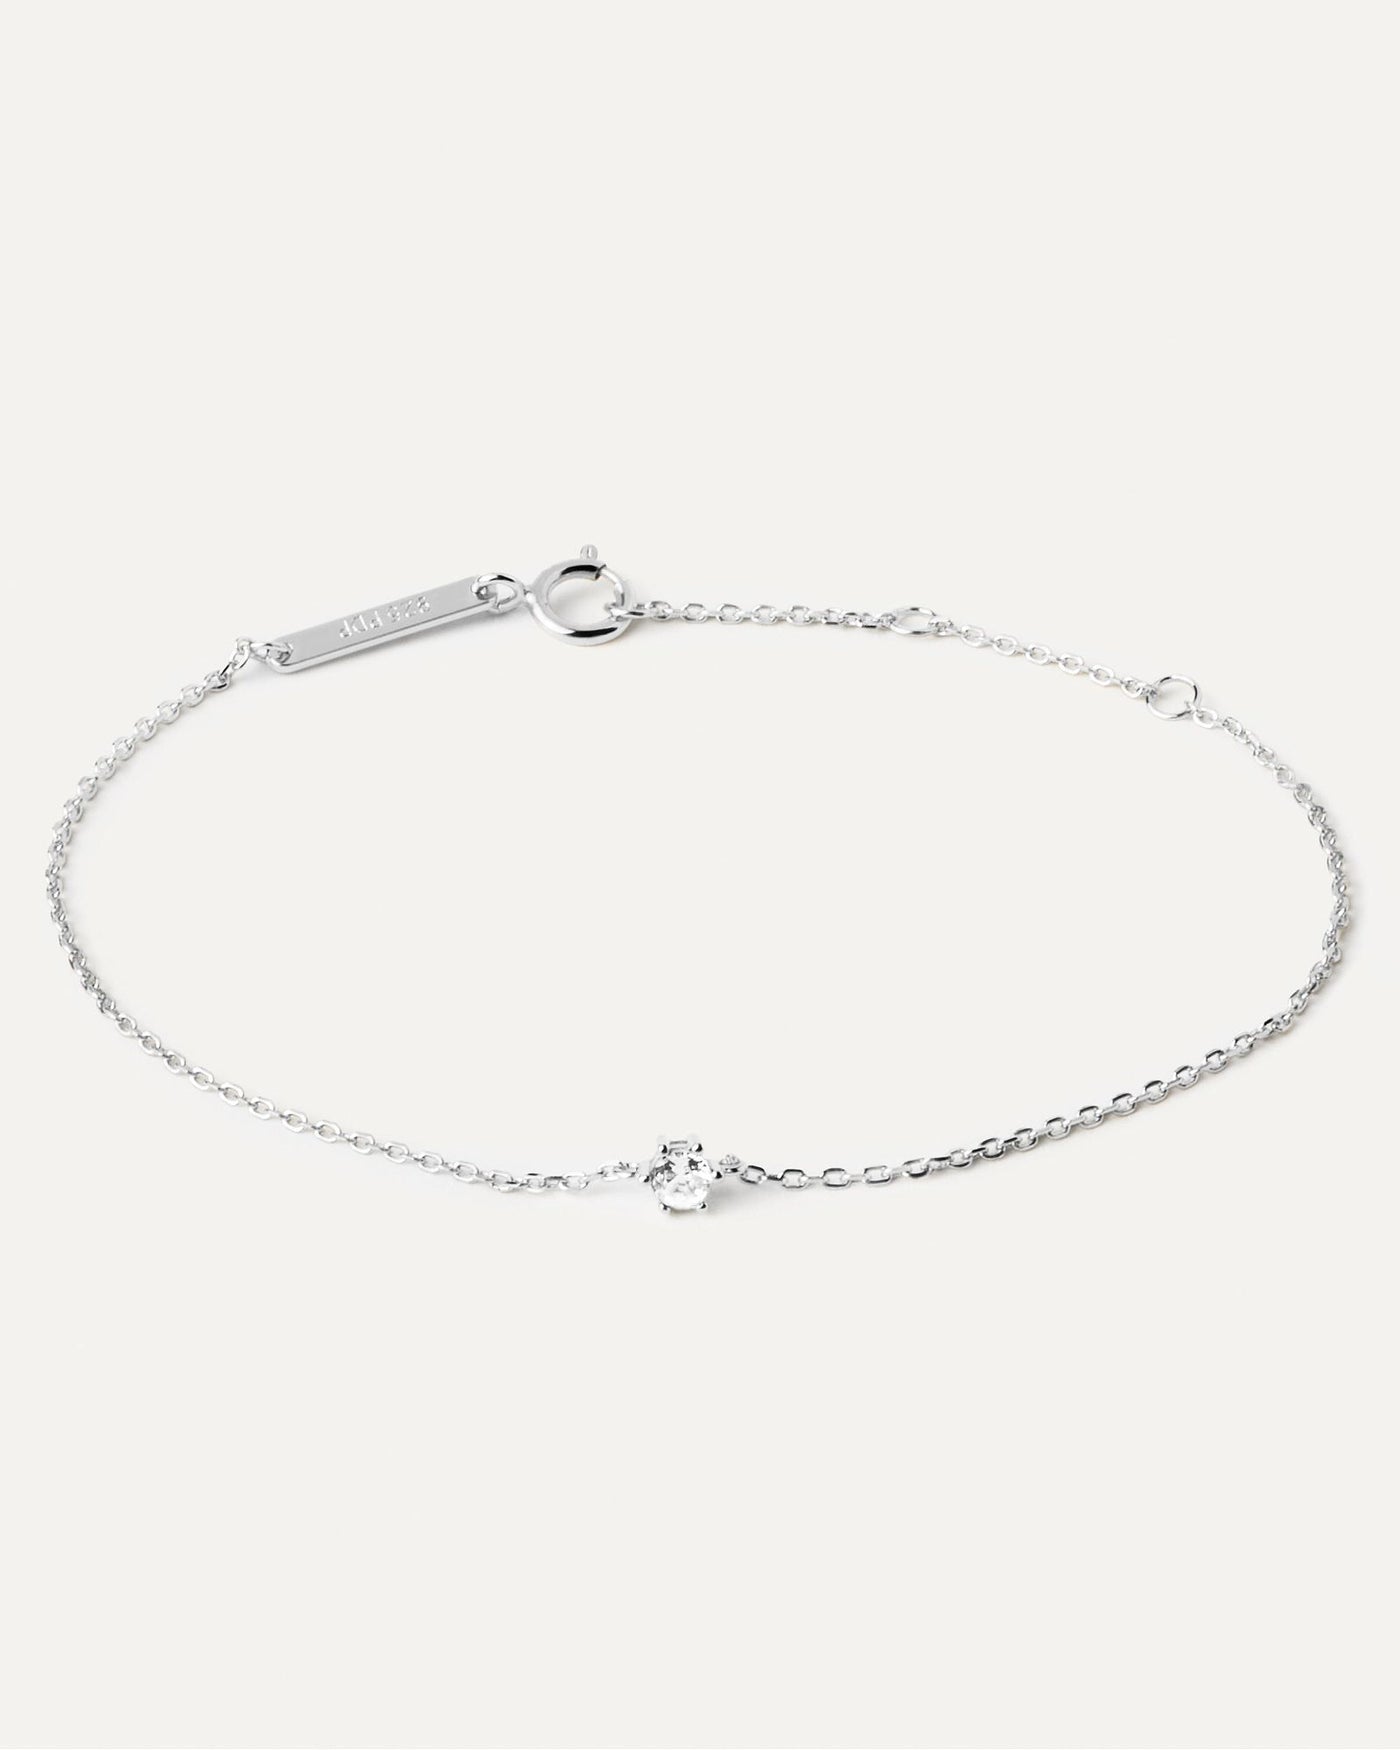 2024 Selection | White Solitary Bracelet Silver. Thin chain bracelet in 925 sterling silver and a white zirconia. Get the latest arrival from PDPAOLA. Place your order safely and get this Best Seller. Free Shipping.